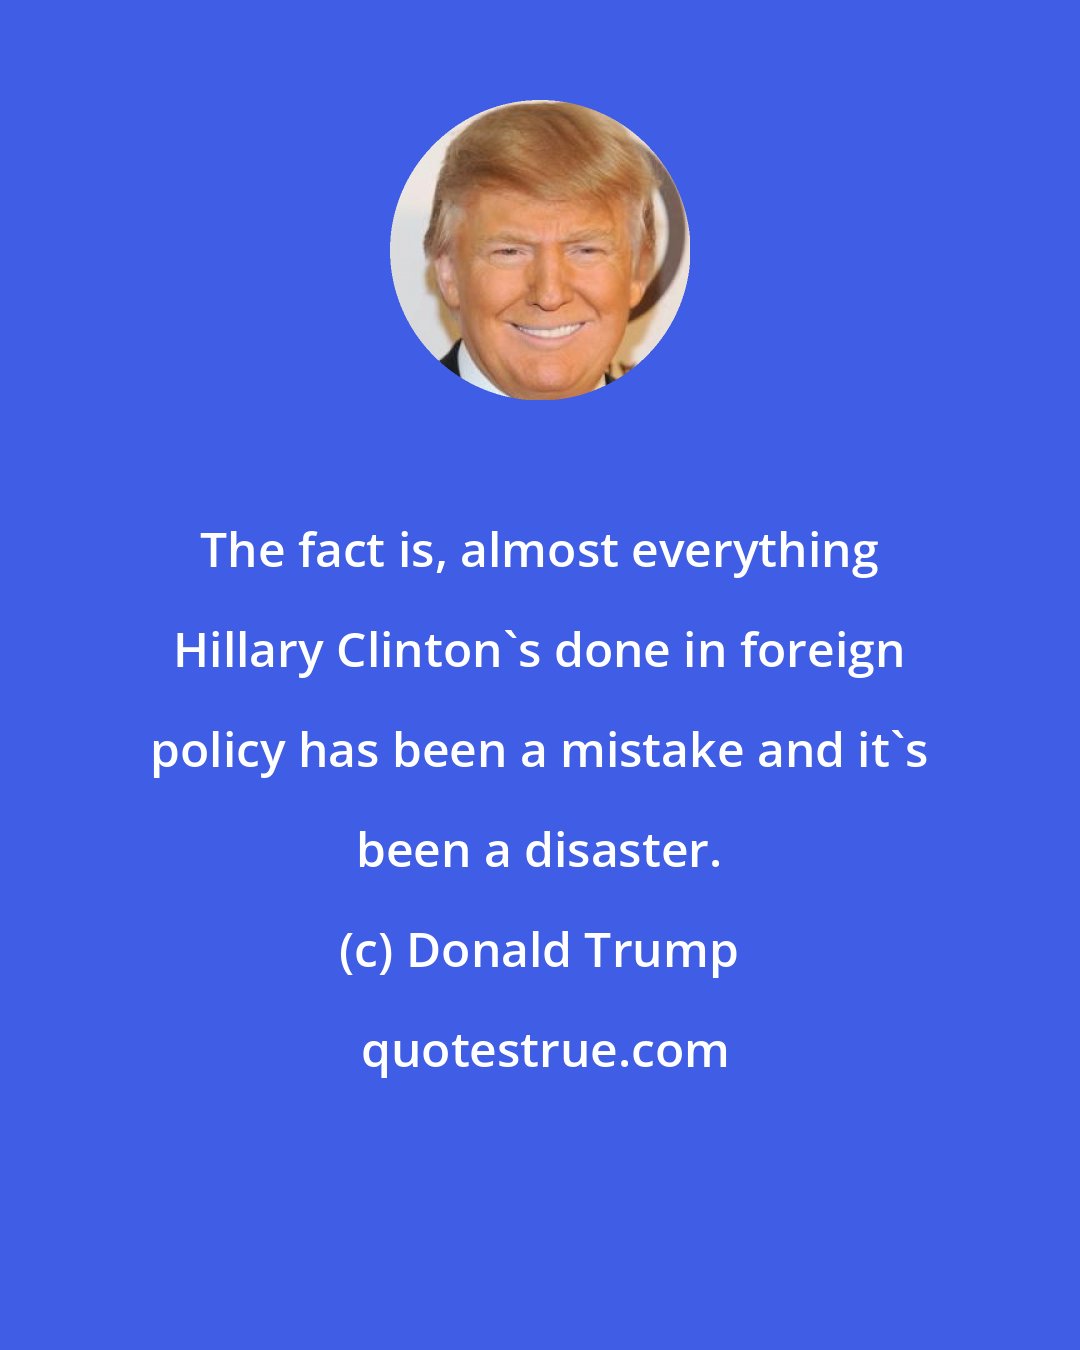 Donald Trump: The fact is, almost everything Hillary Clinton's done in foreign policy has been a mistake and it's been a disaster.